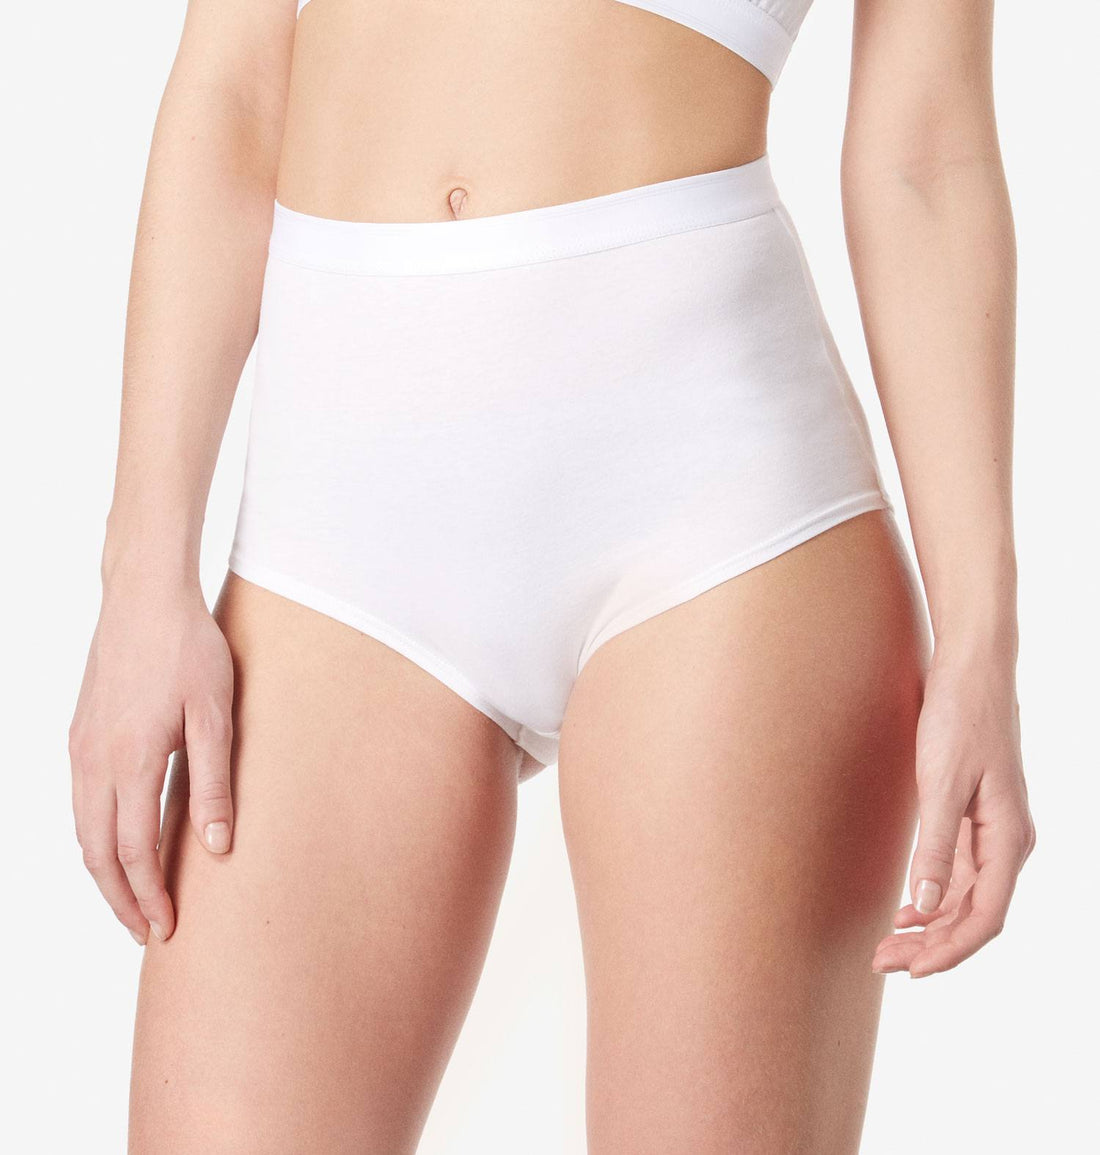 Women's Gym Pant in White